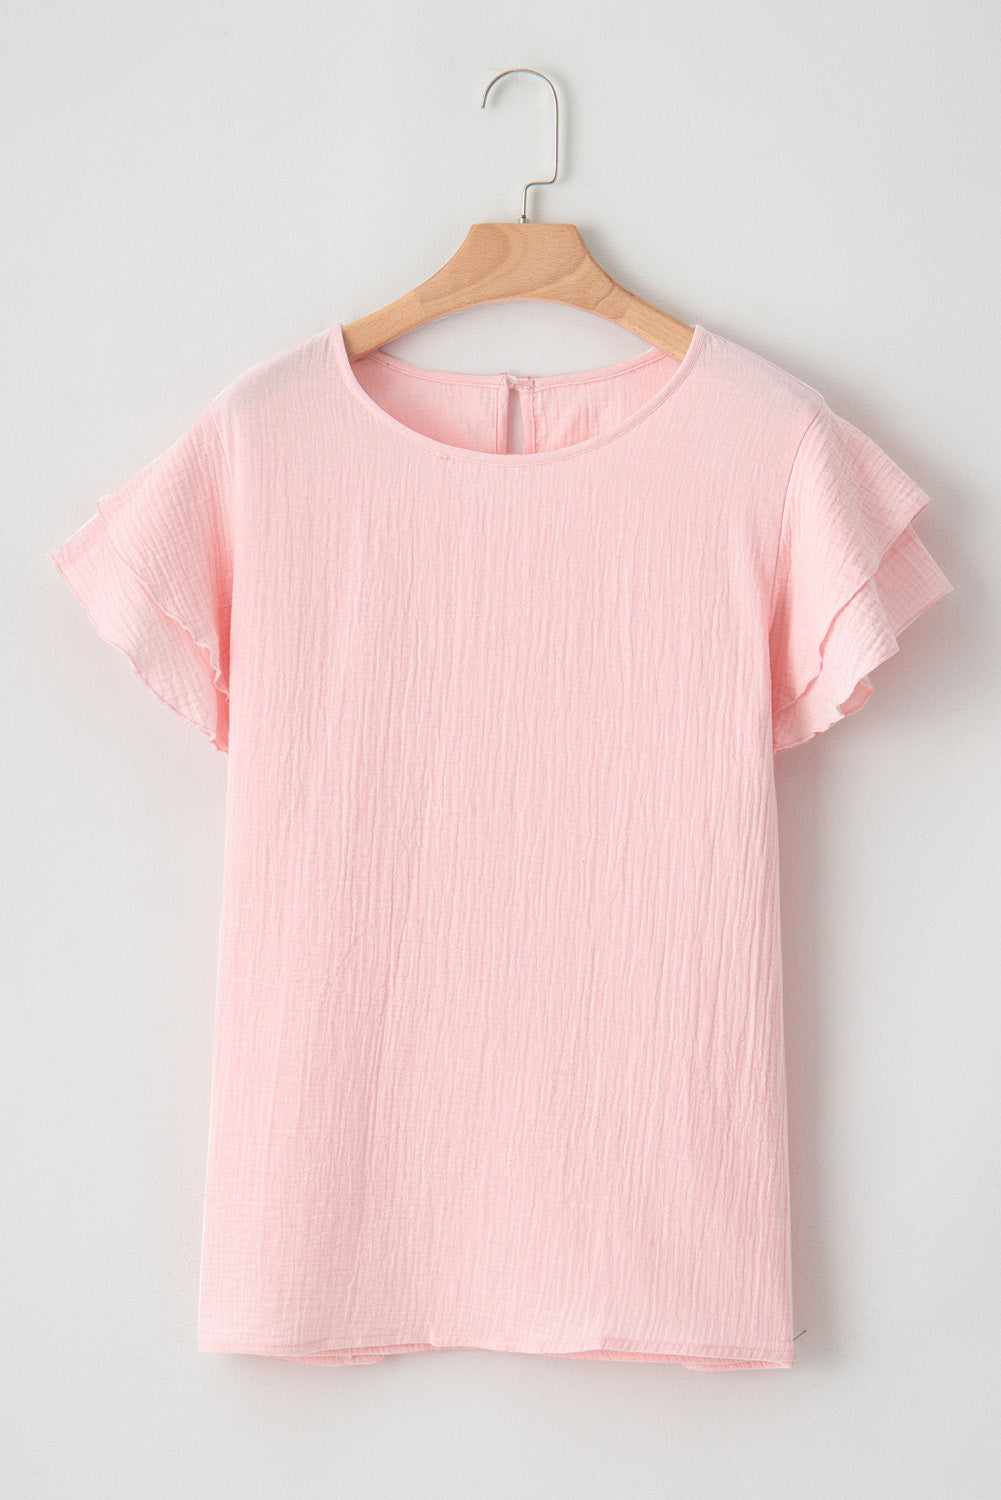 Light Pink Crinkle Textured Ruffle Sleeve Top (CURVY ONLY)